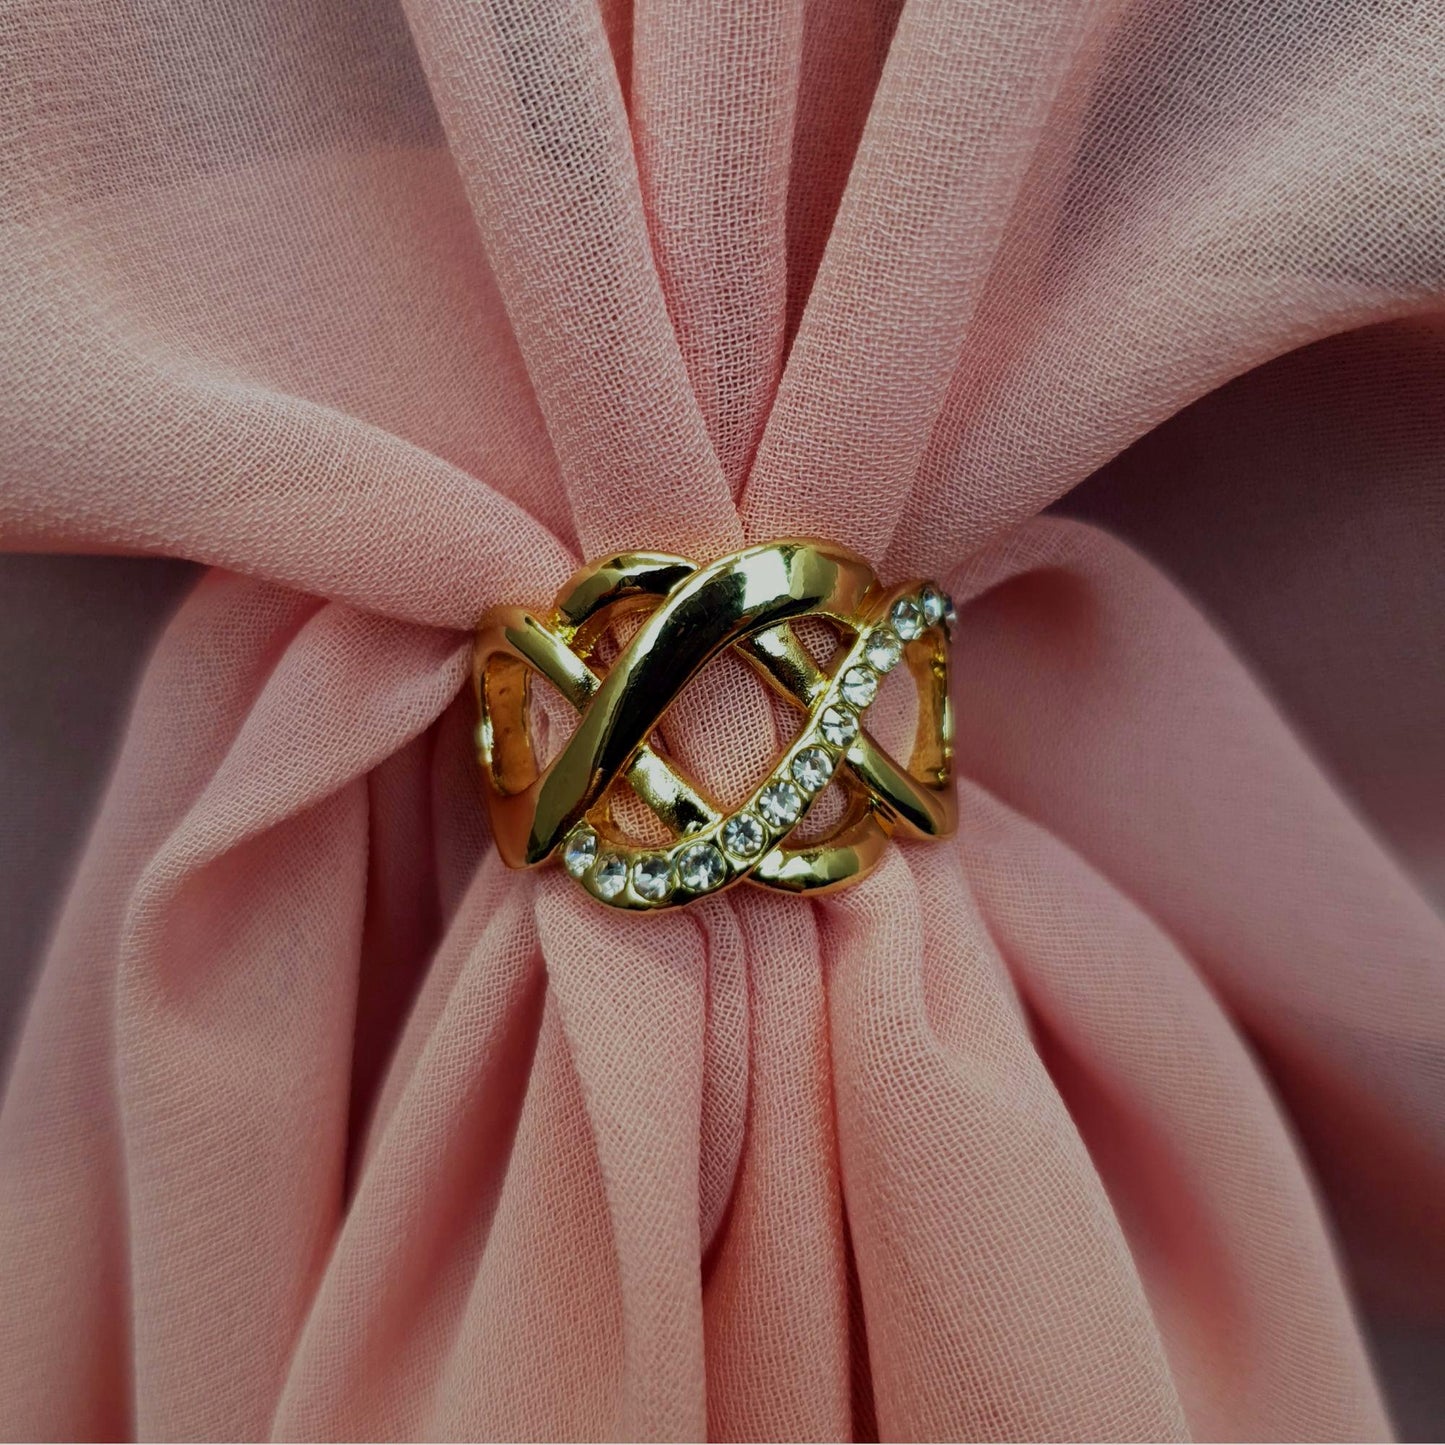 The U Wrap with Diamonte Scarf Ring Set (Dusty Rose)